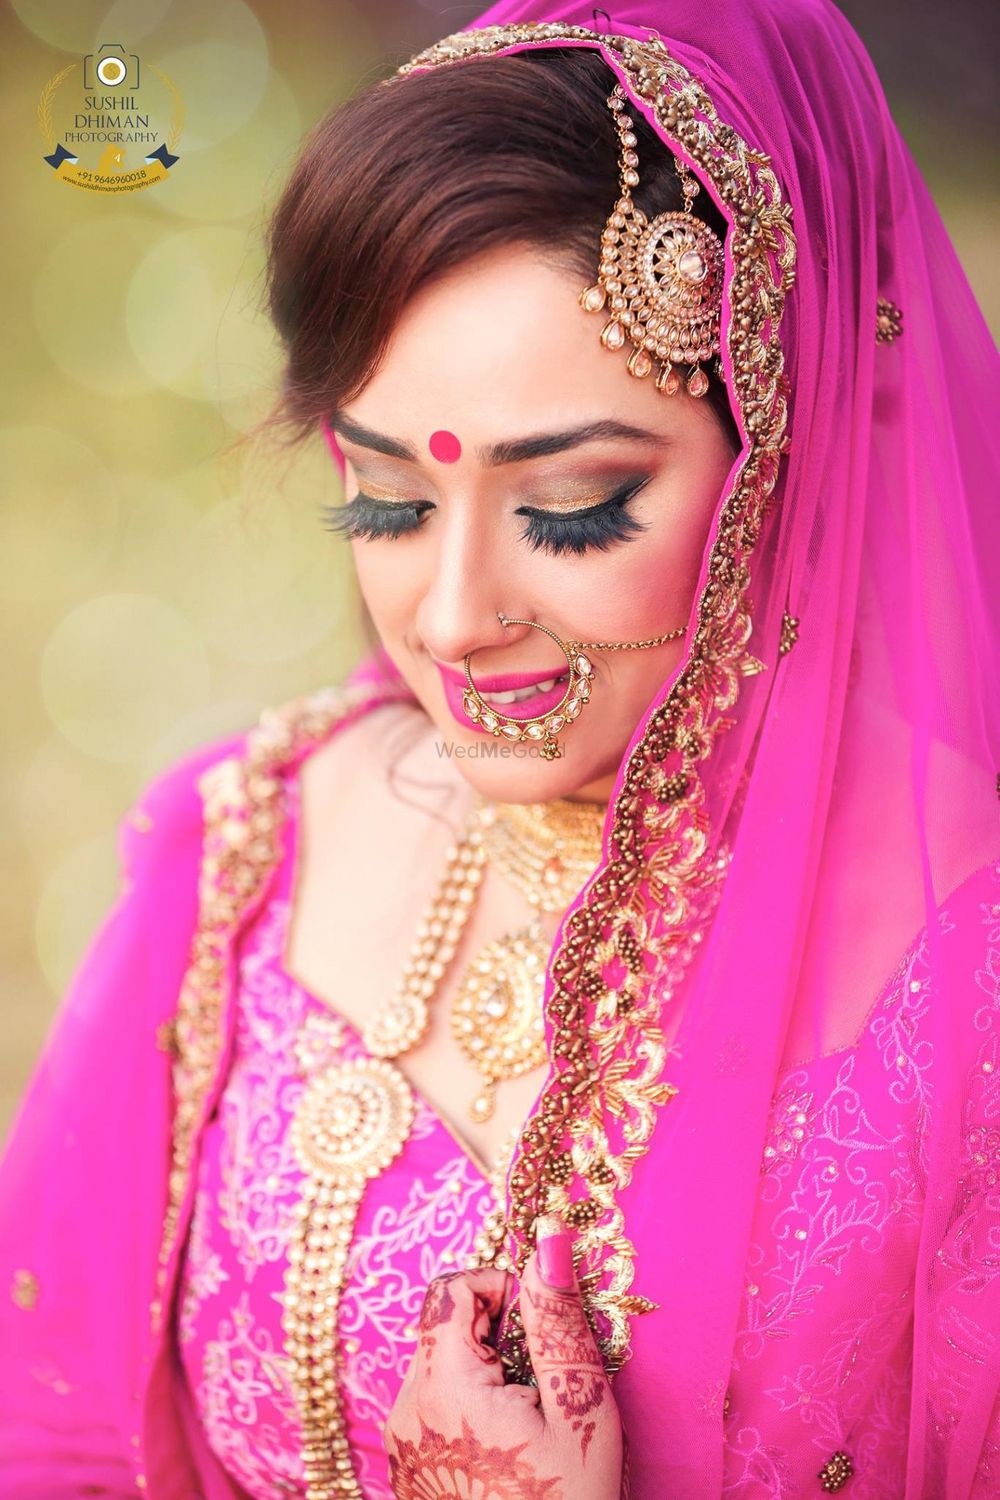 Photo From Kunal & prableen - By Sushil Dhiman Photography